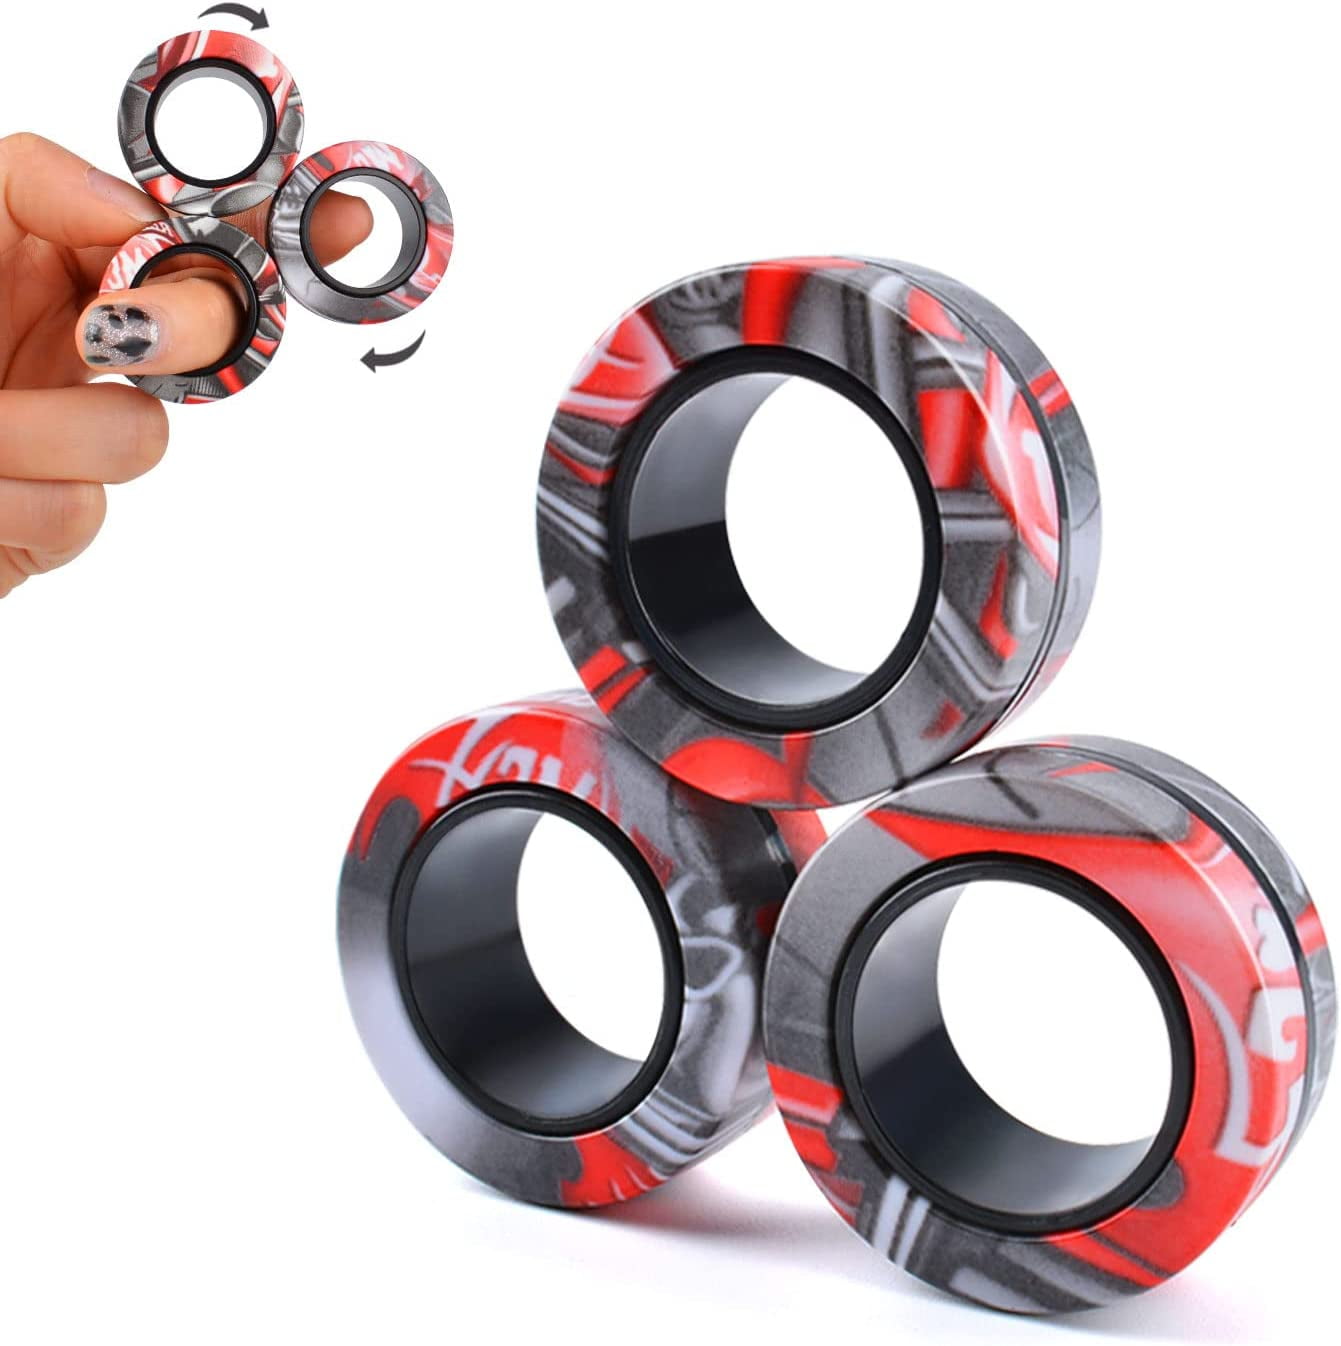 Lowrey Polished Stainless Adult Fidget Toy Magnetic Haptic ADHD